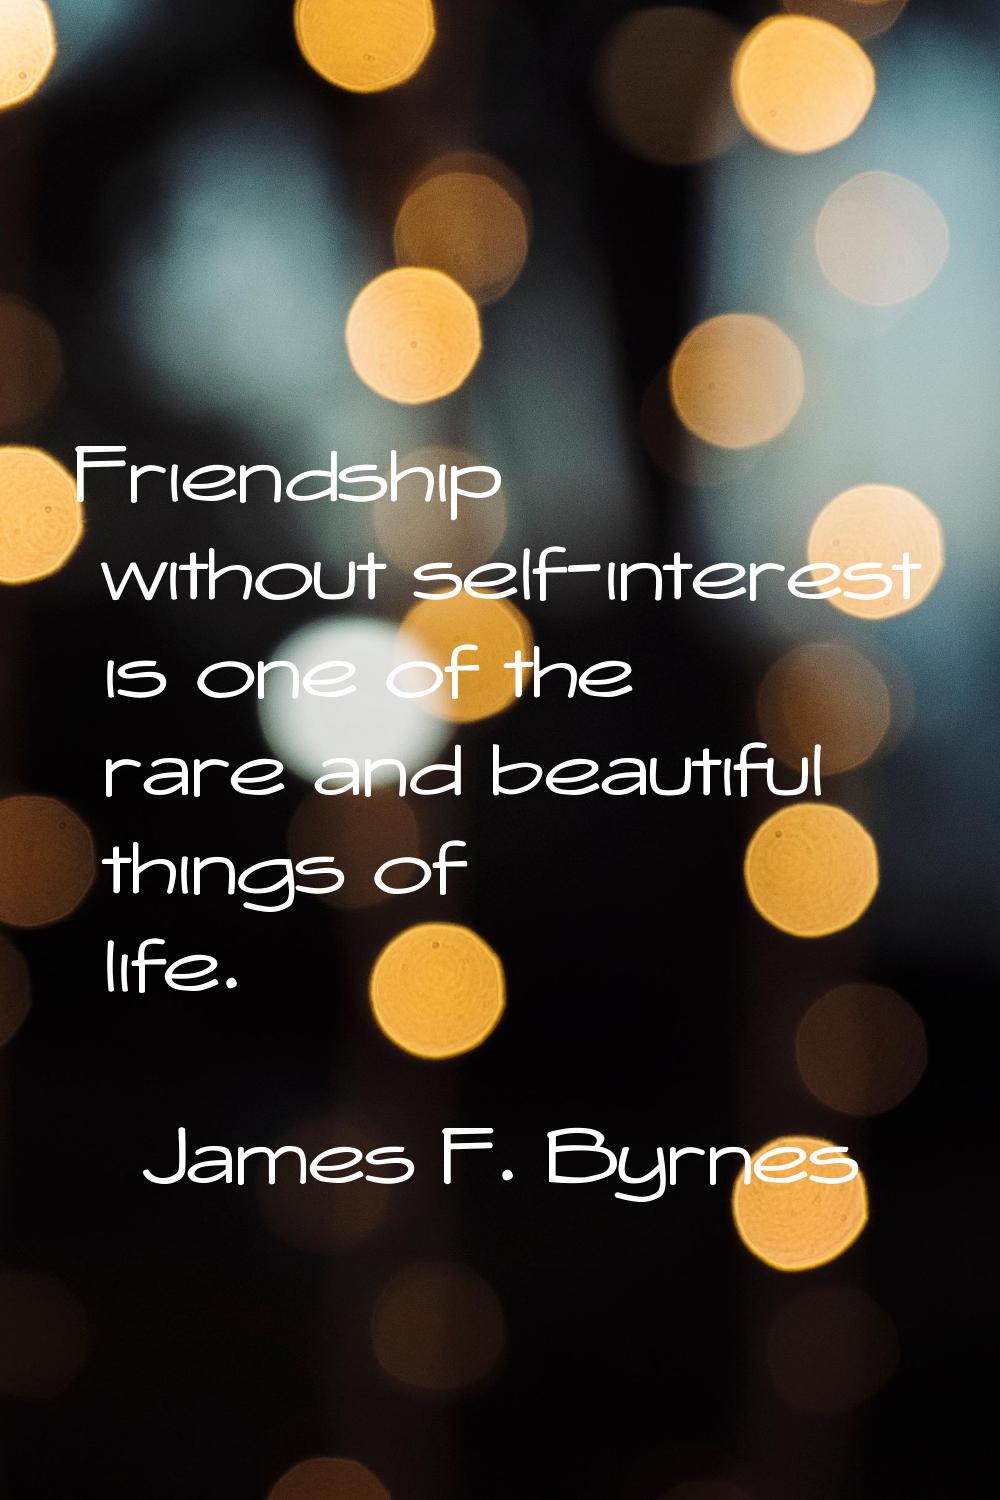 Friendship without self-interest is one of the rare and beautiful things of life.